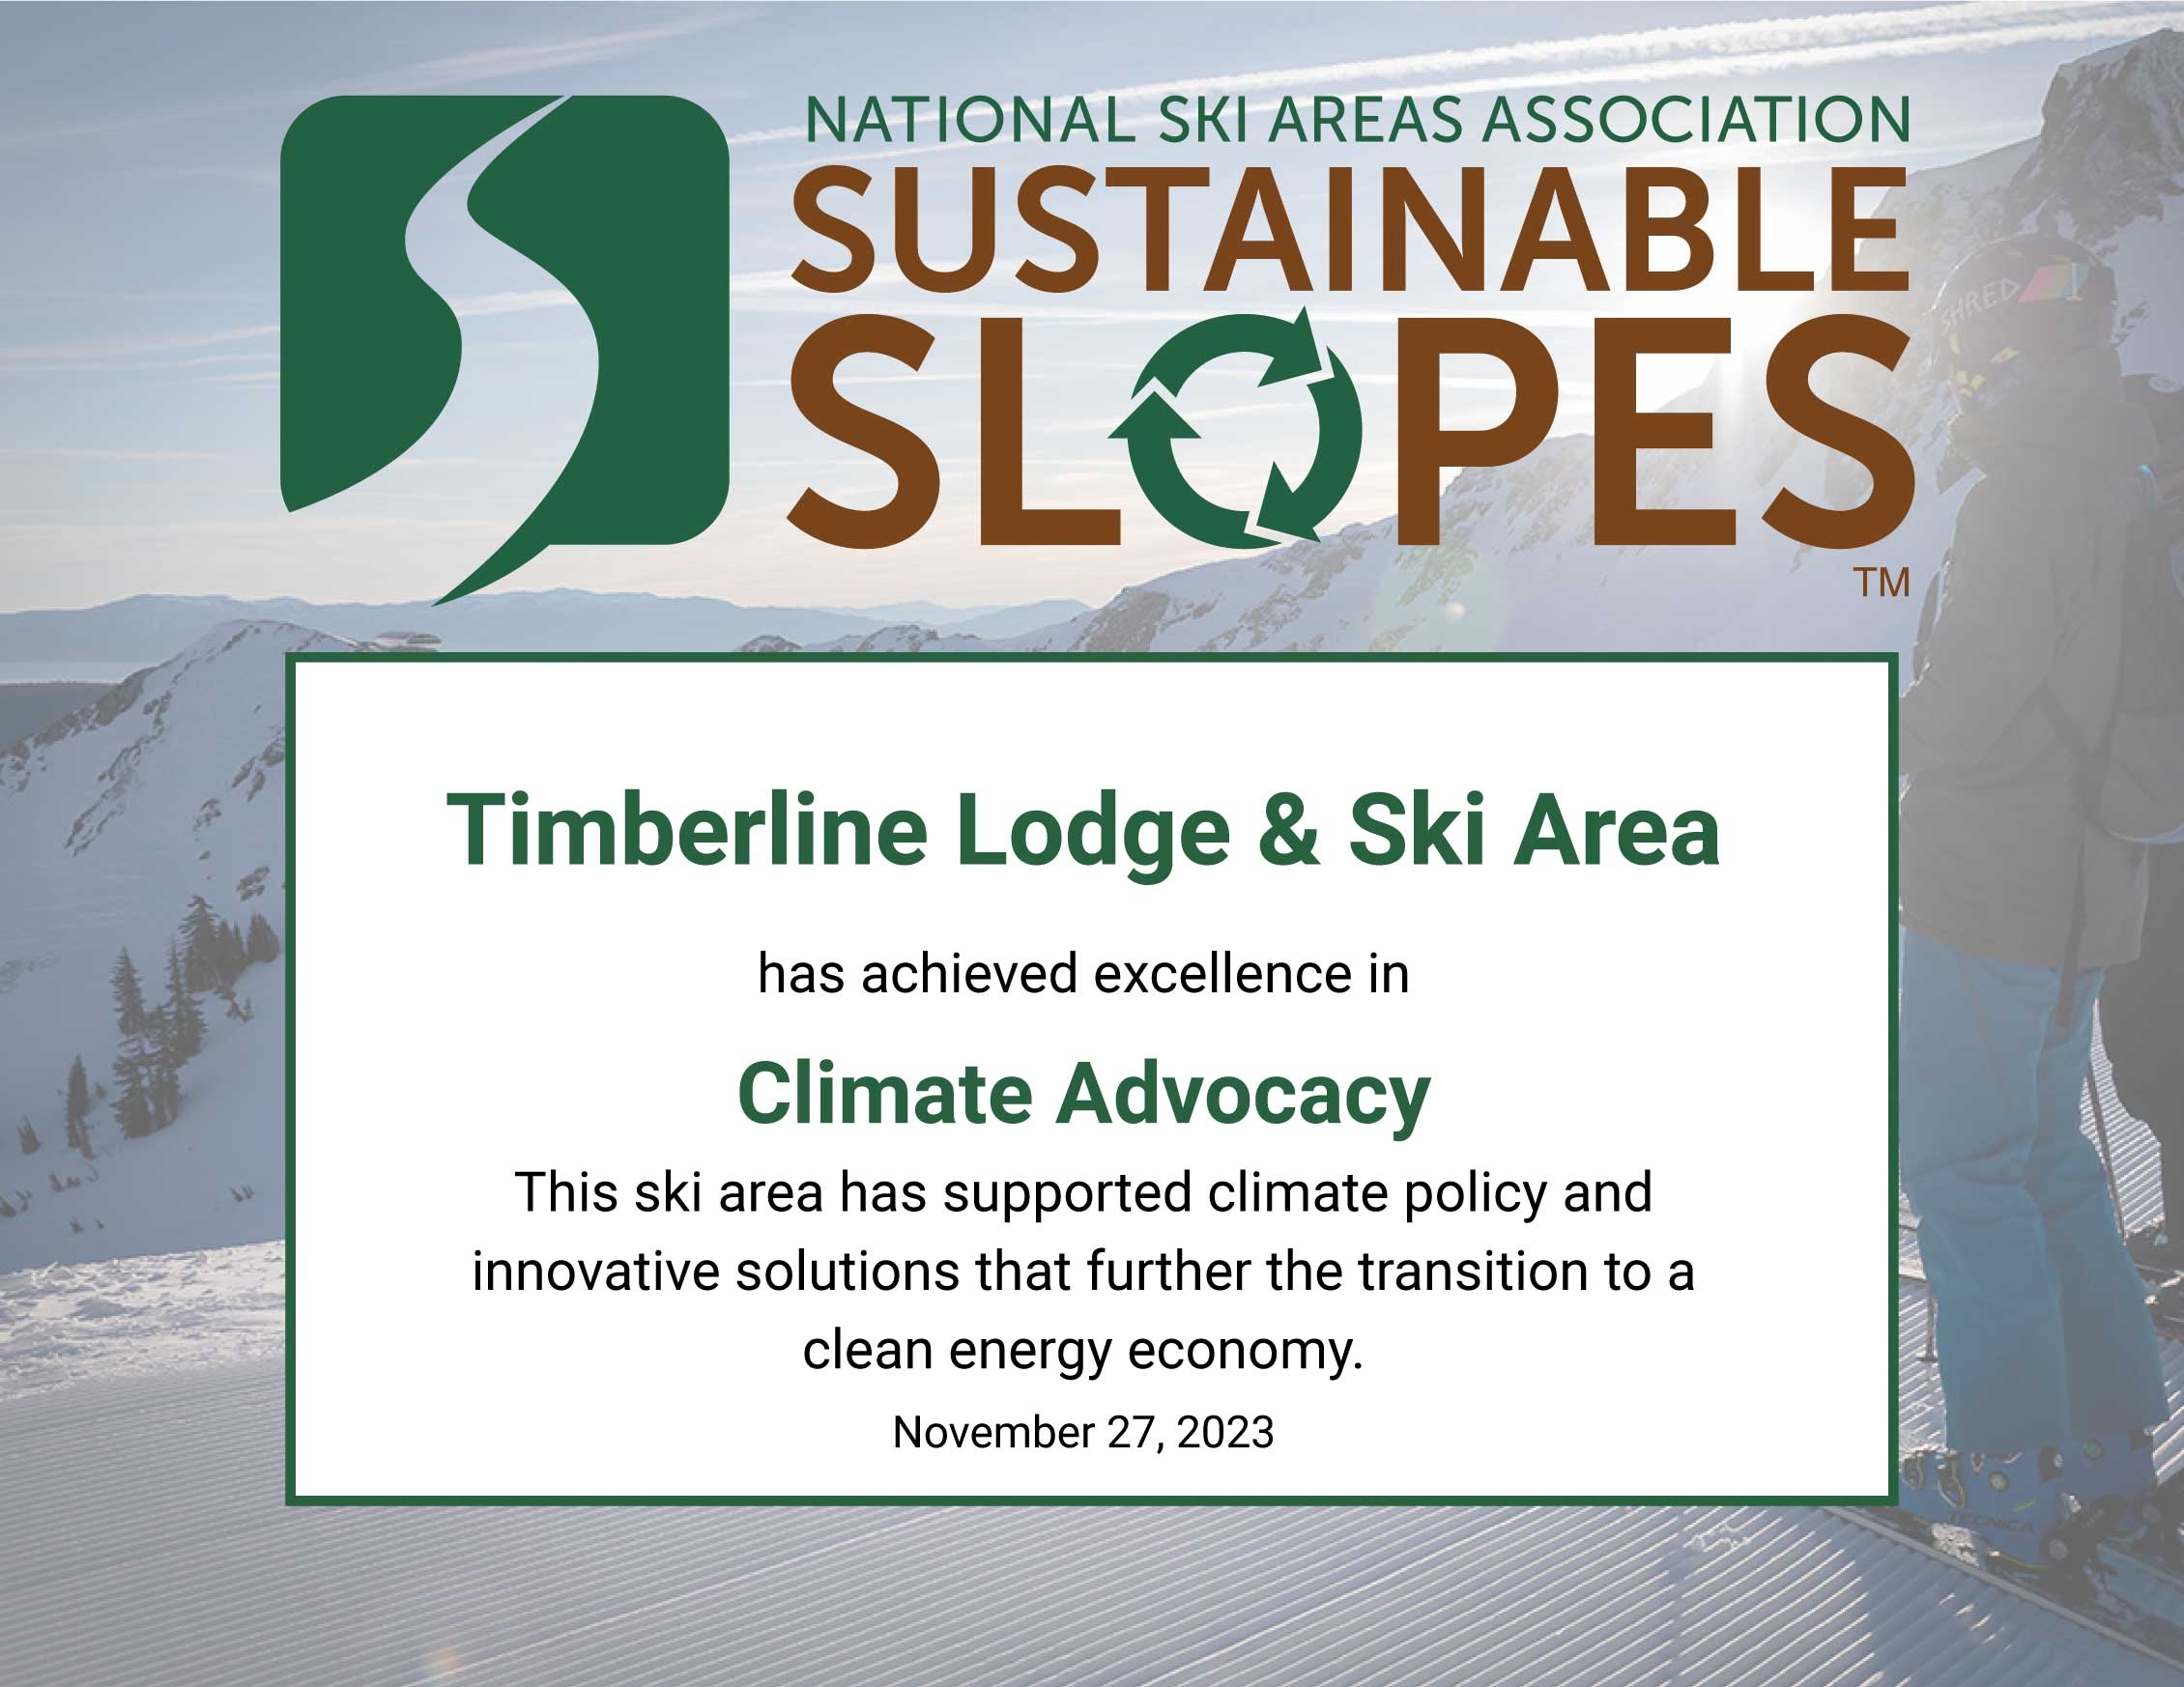 NSAA SUSTAINABLE SLOPES CERTIFICATE RECOGNIZING TIMBERLINE LODGE